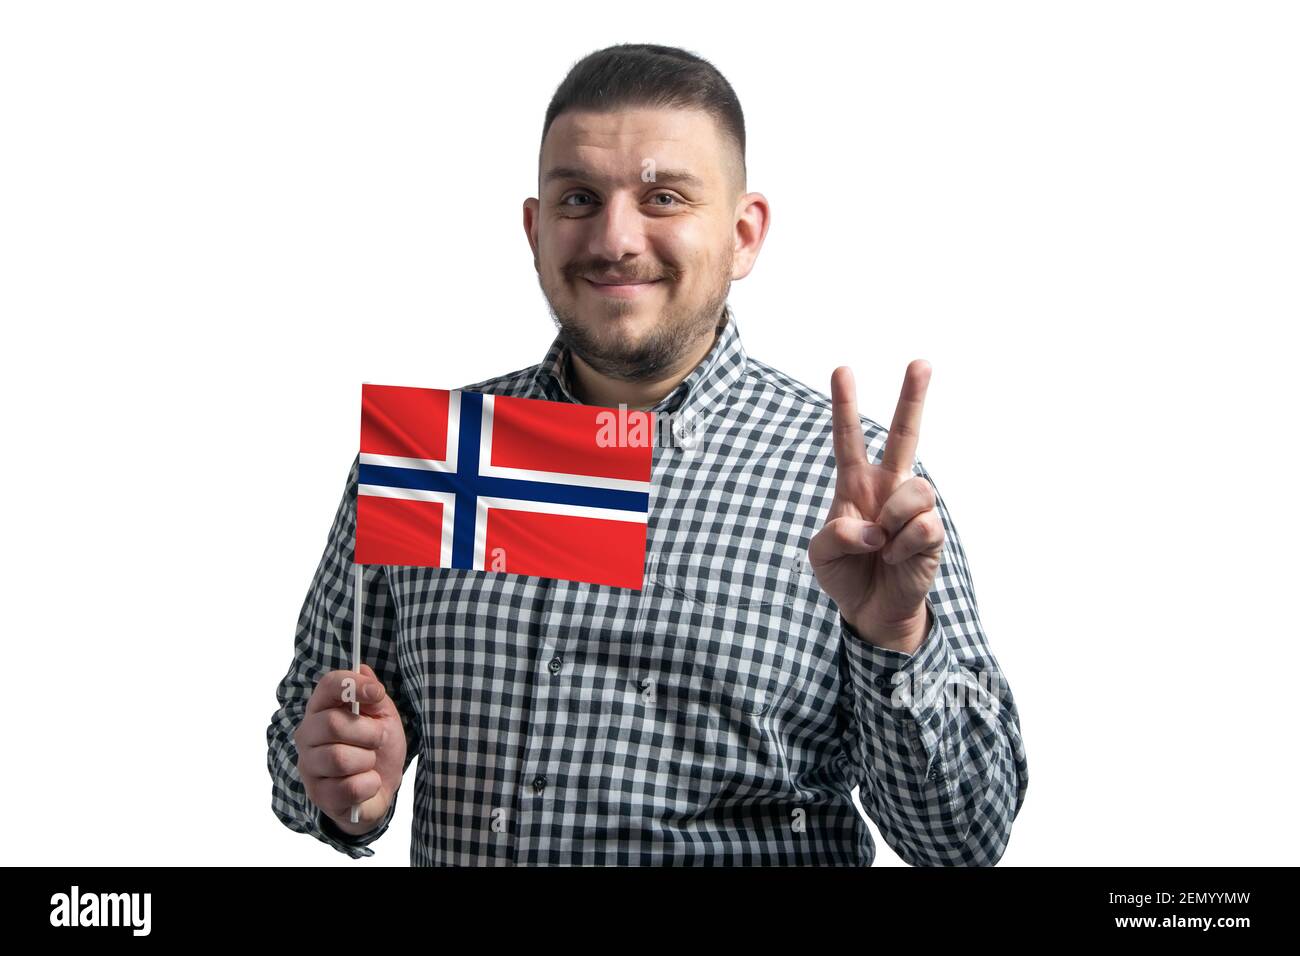 White guy holding a flag of Norway and shows two fingers isolated on a ...